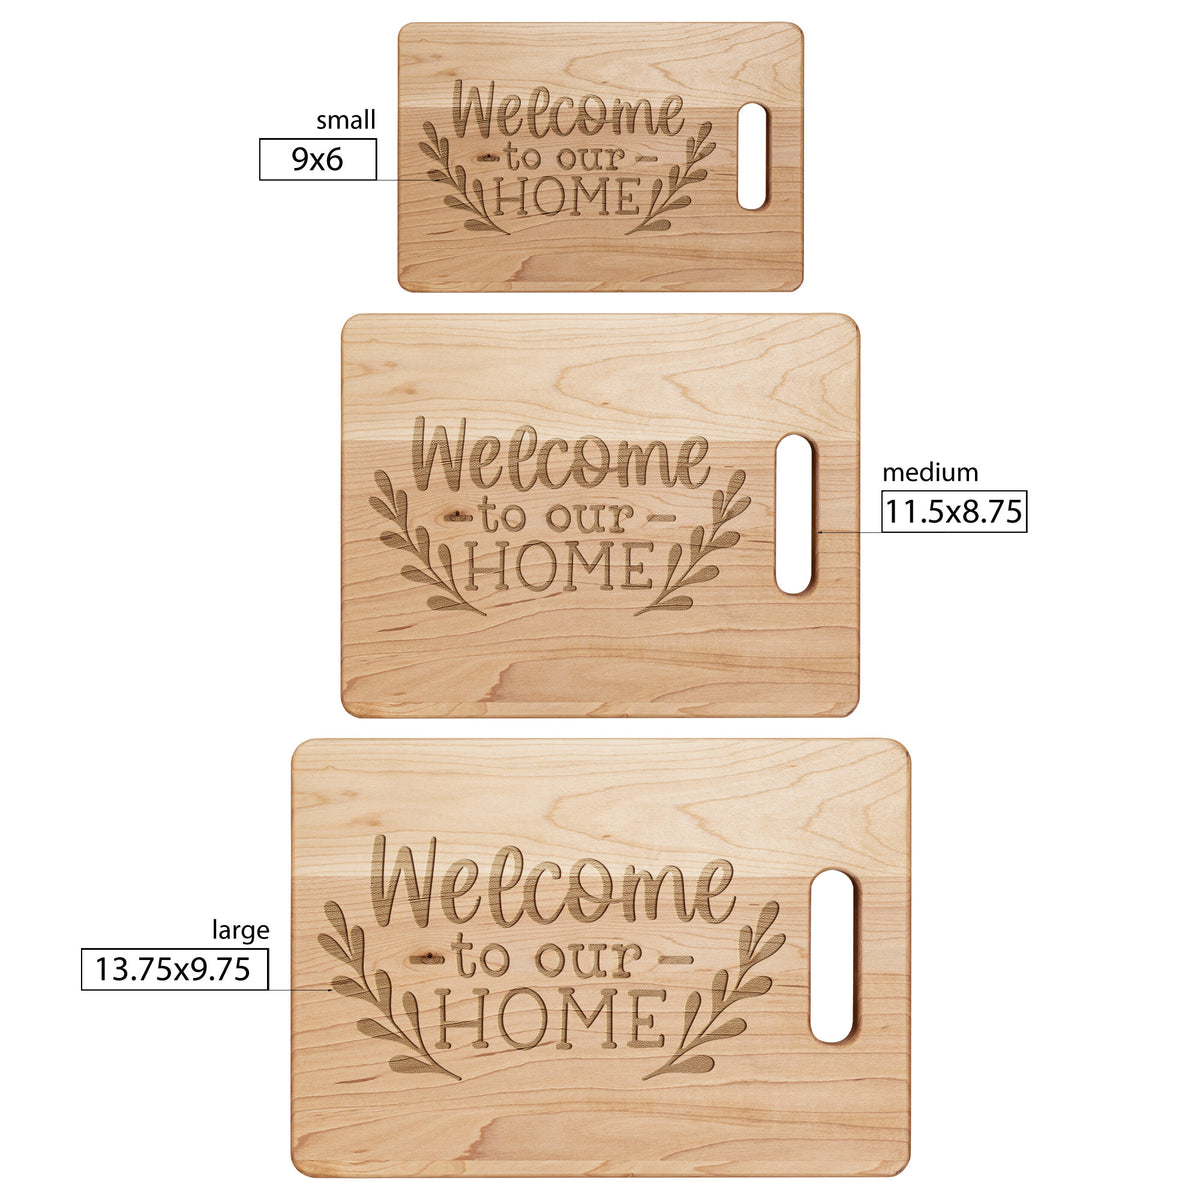 Home Sweet Home Cutting board – Wood Centric